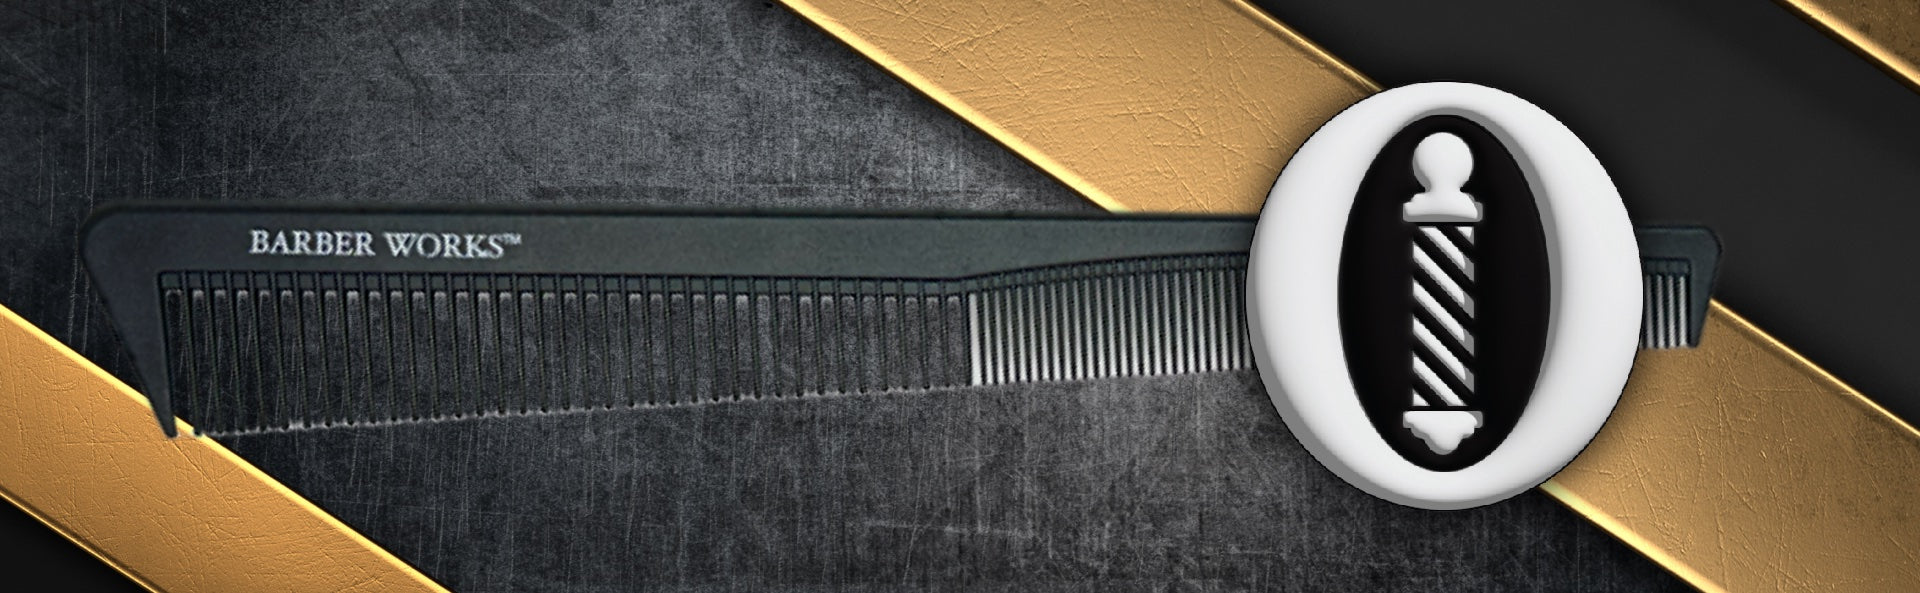 Barber Works 7-inch Taper Comb, the essential tool for precision cuts and styling, highlighting its durable carbon fiber construction.